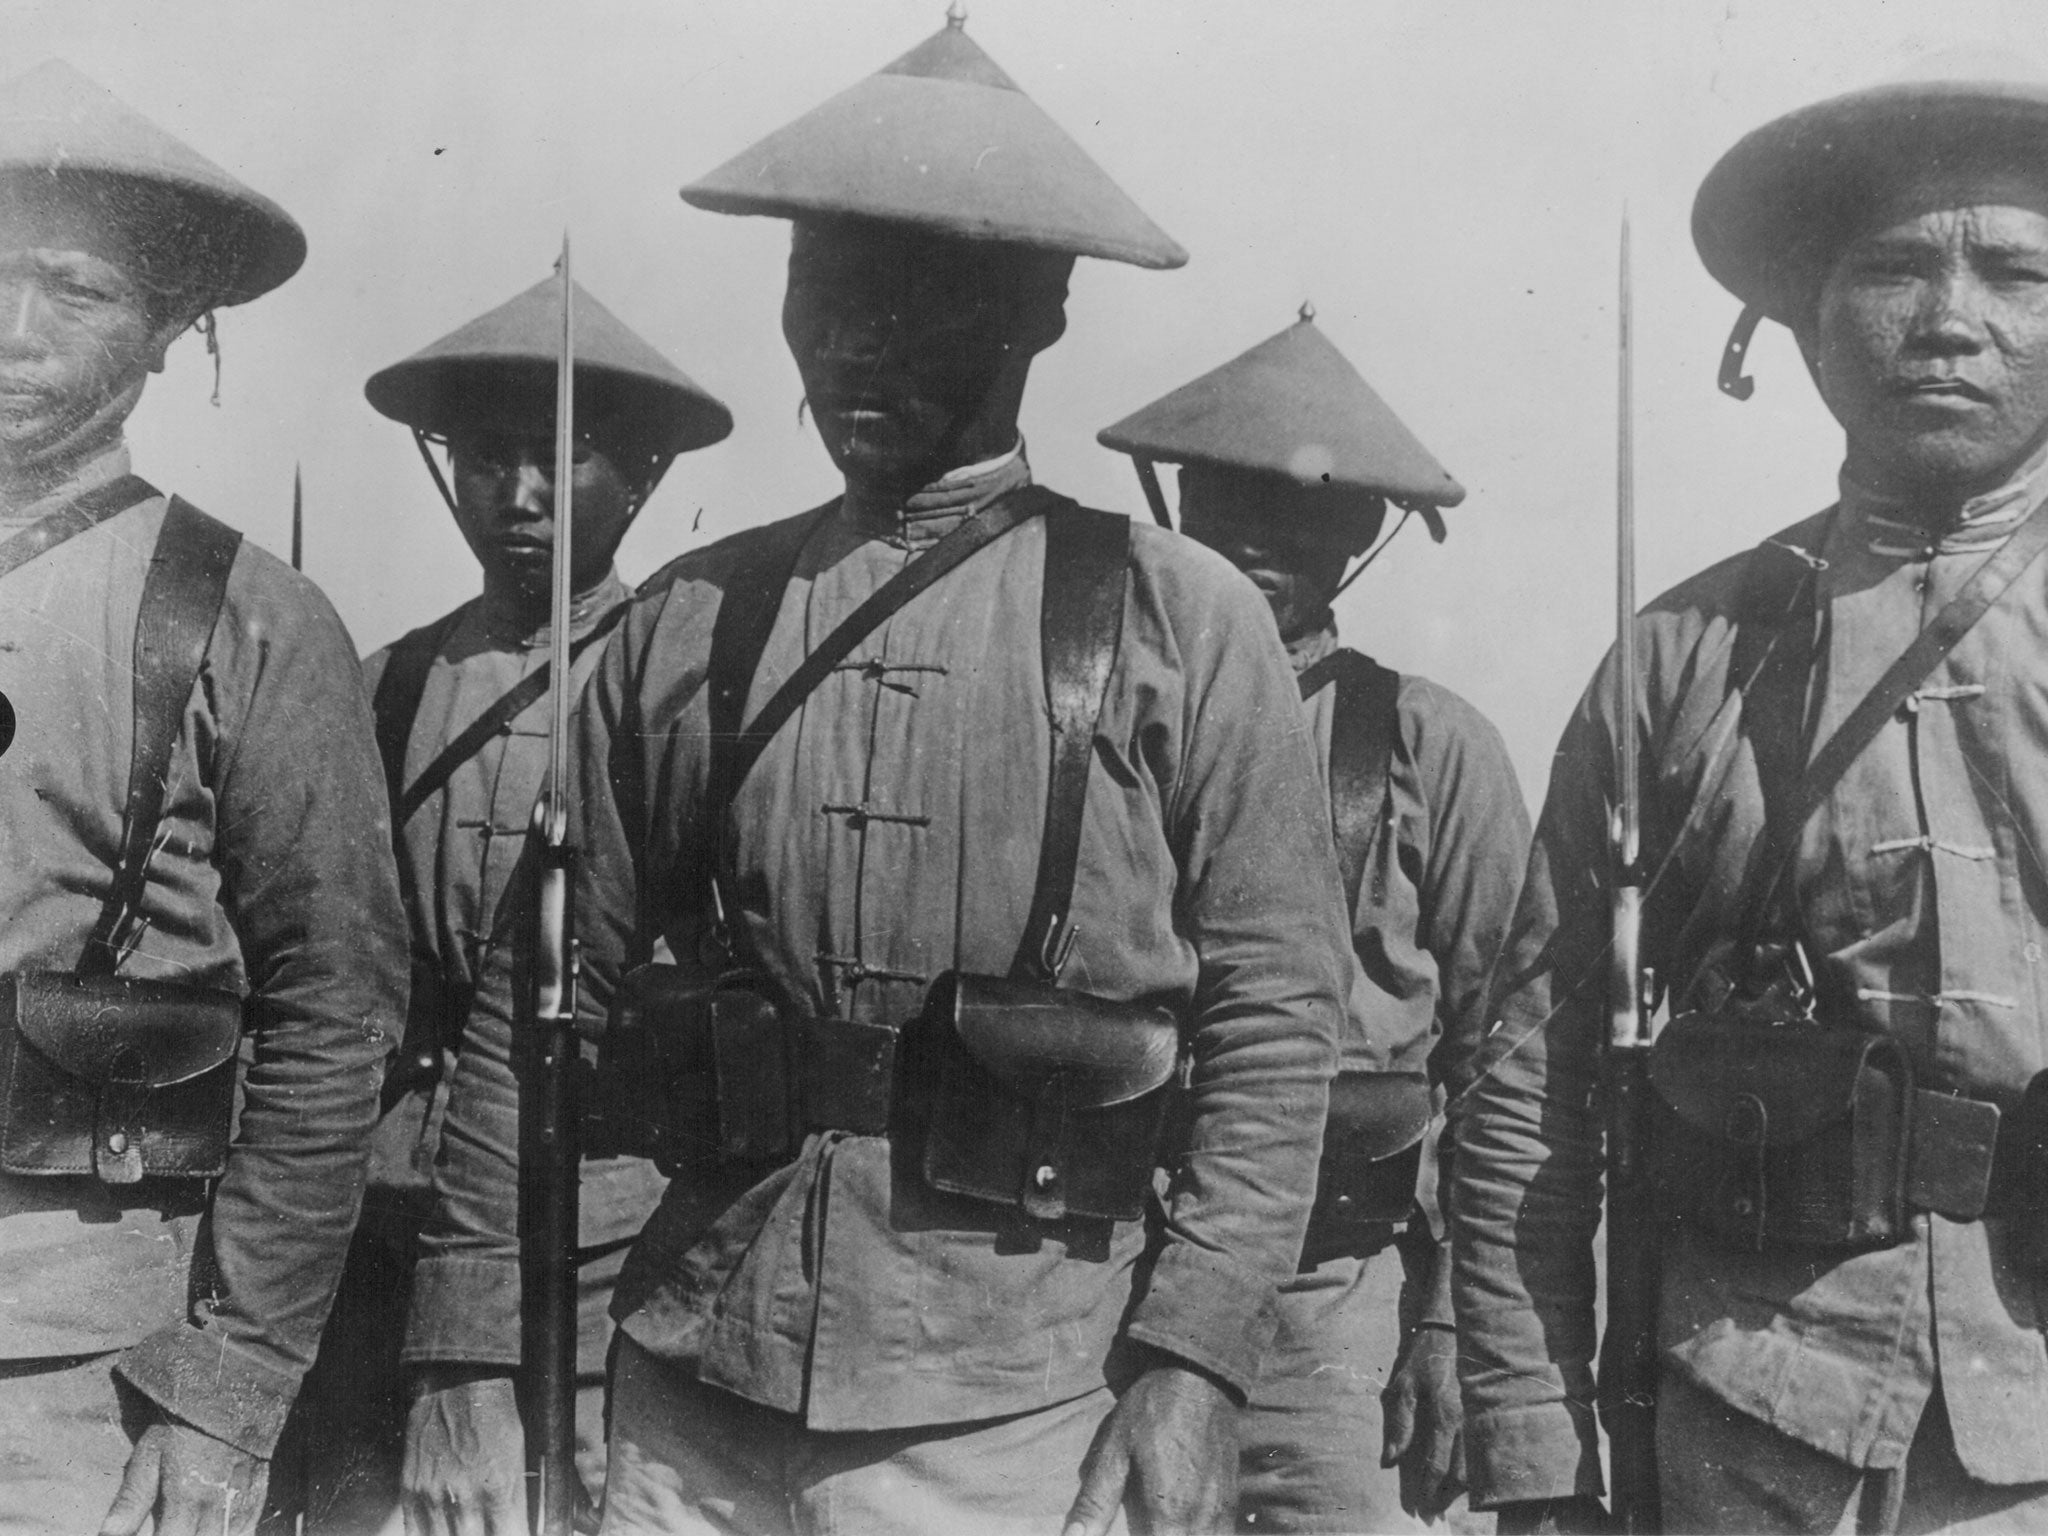 Indo-Chinese colonial troops during the First World War